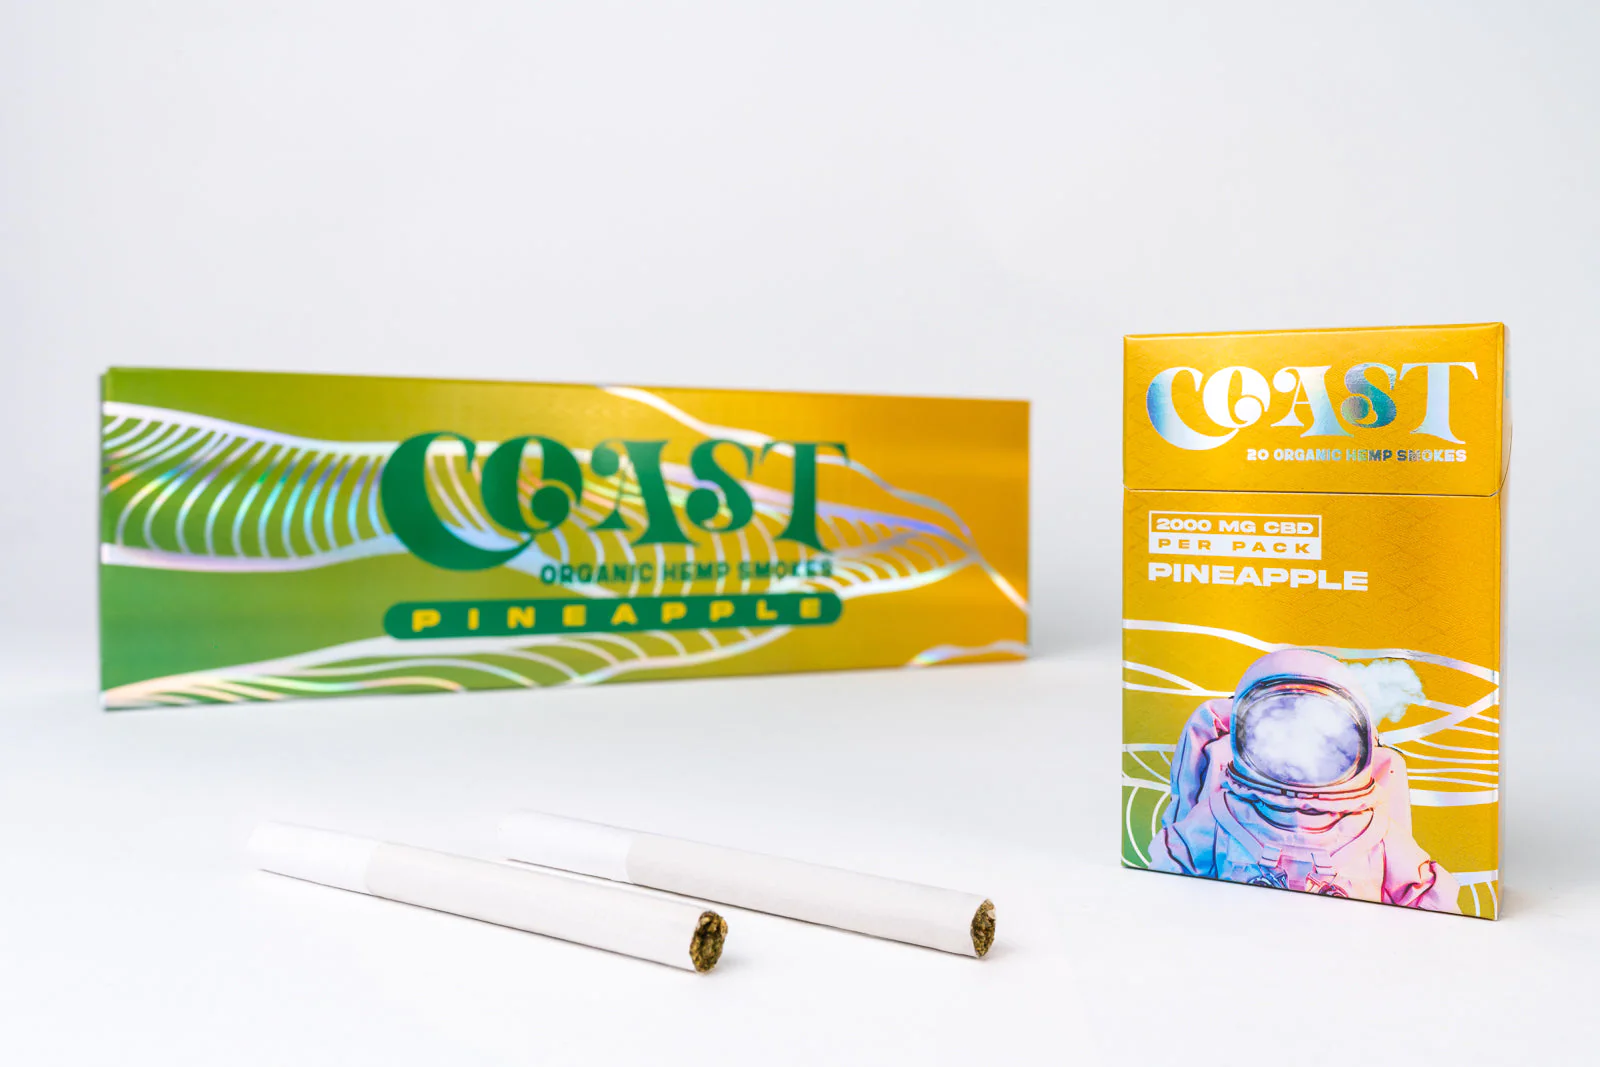 CBD Cigarettes ByCoastsmokes-In Depth Analysis of Top CBD Cigarettes A Comrephensive Review